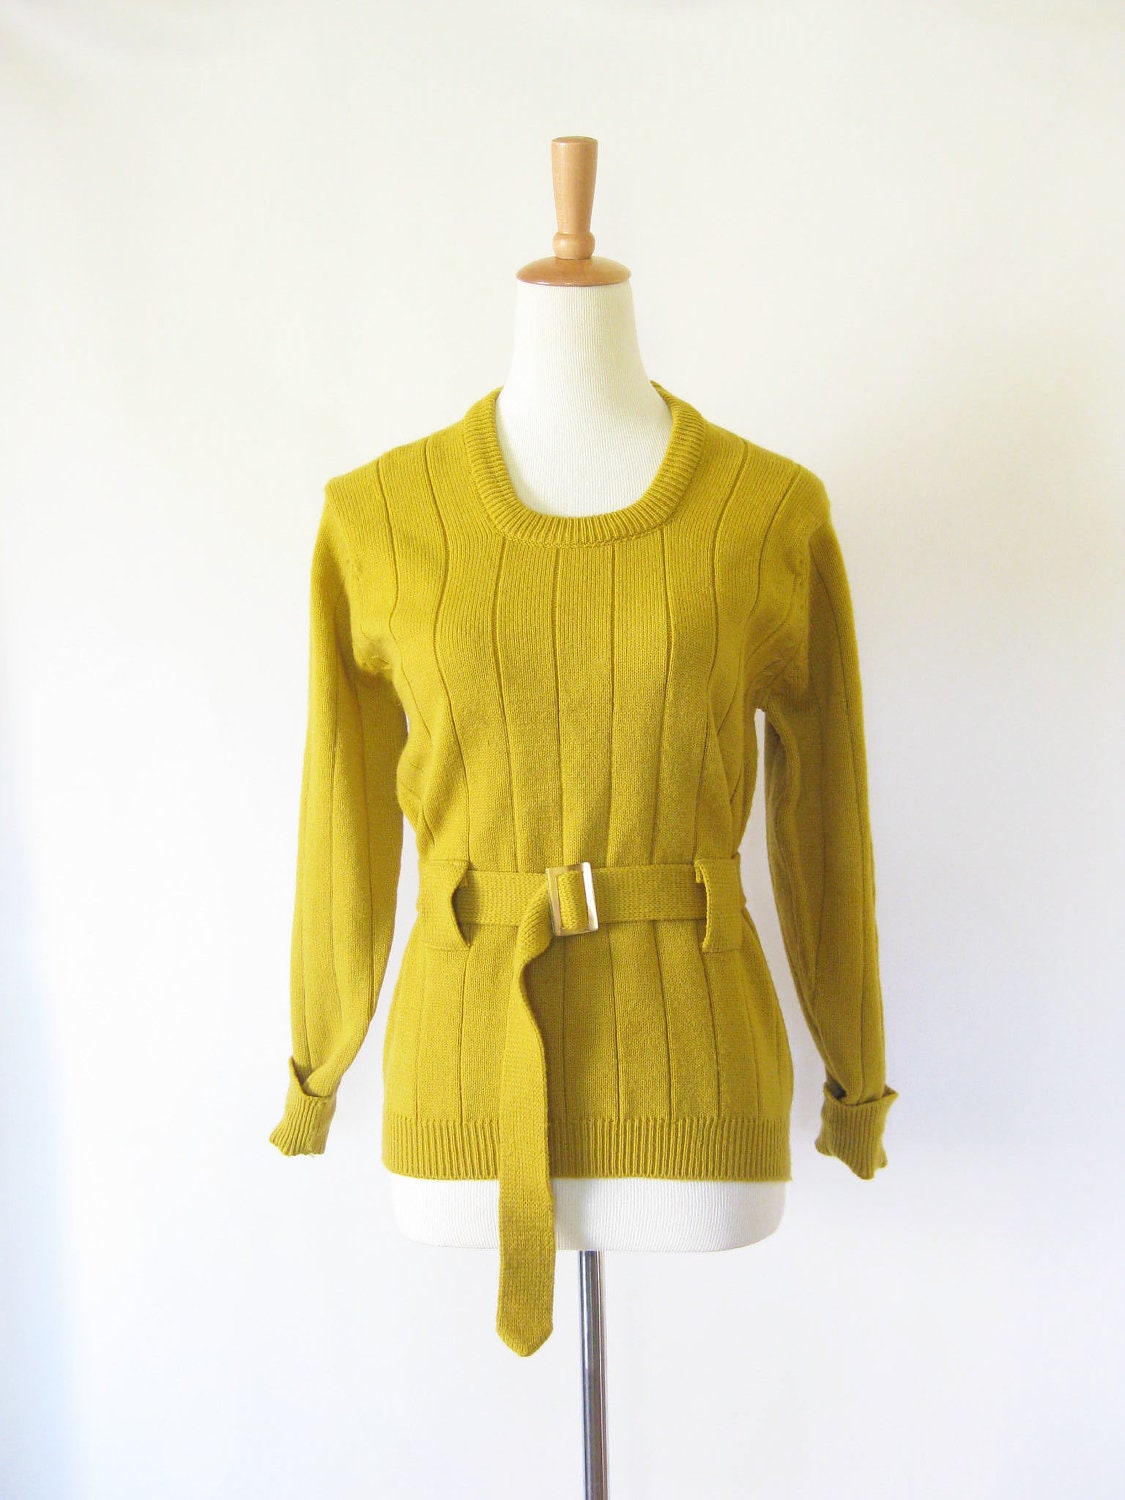 Vintage GOLDENROD Sweater Womens MAD MEN Belted Pull Over Small Medium S M Indie Hipster Mod Ladies Green